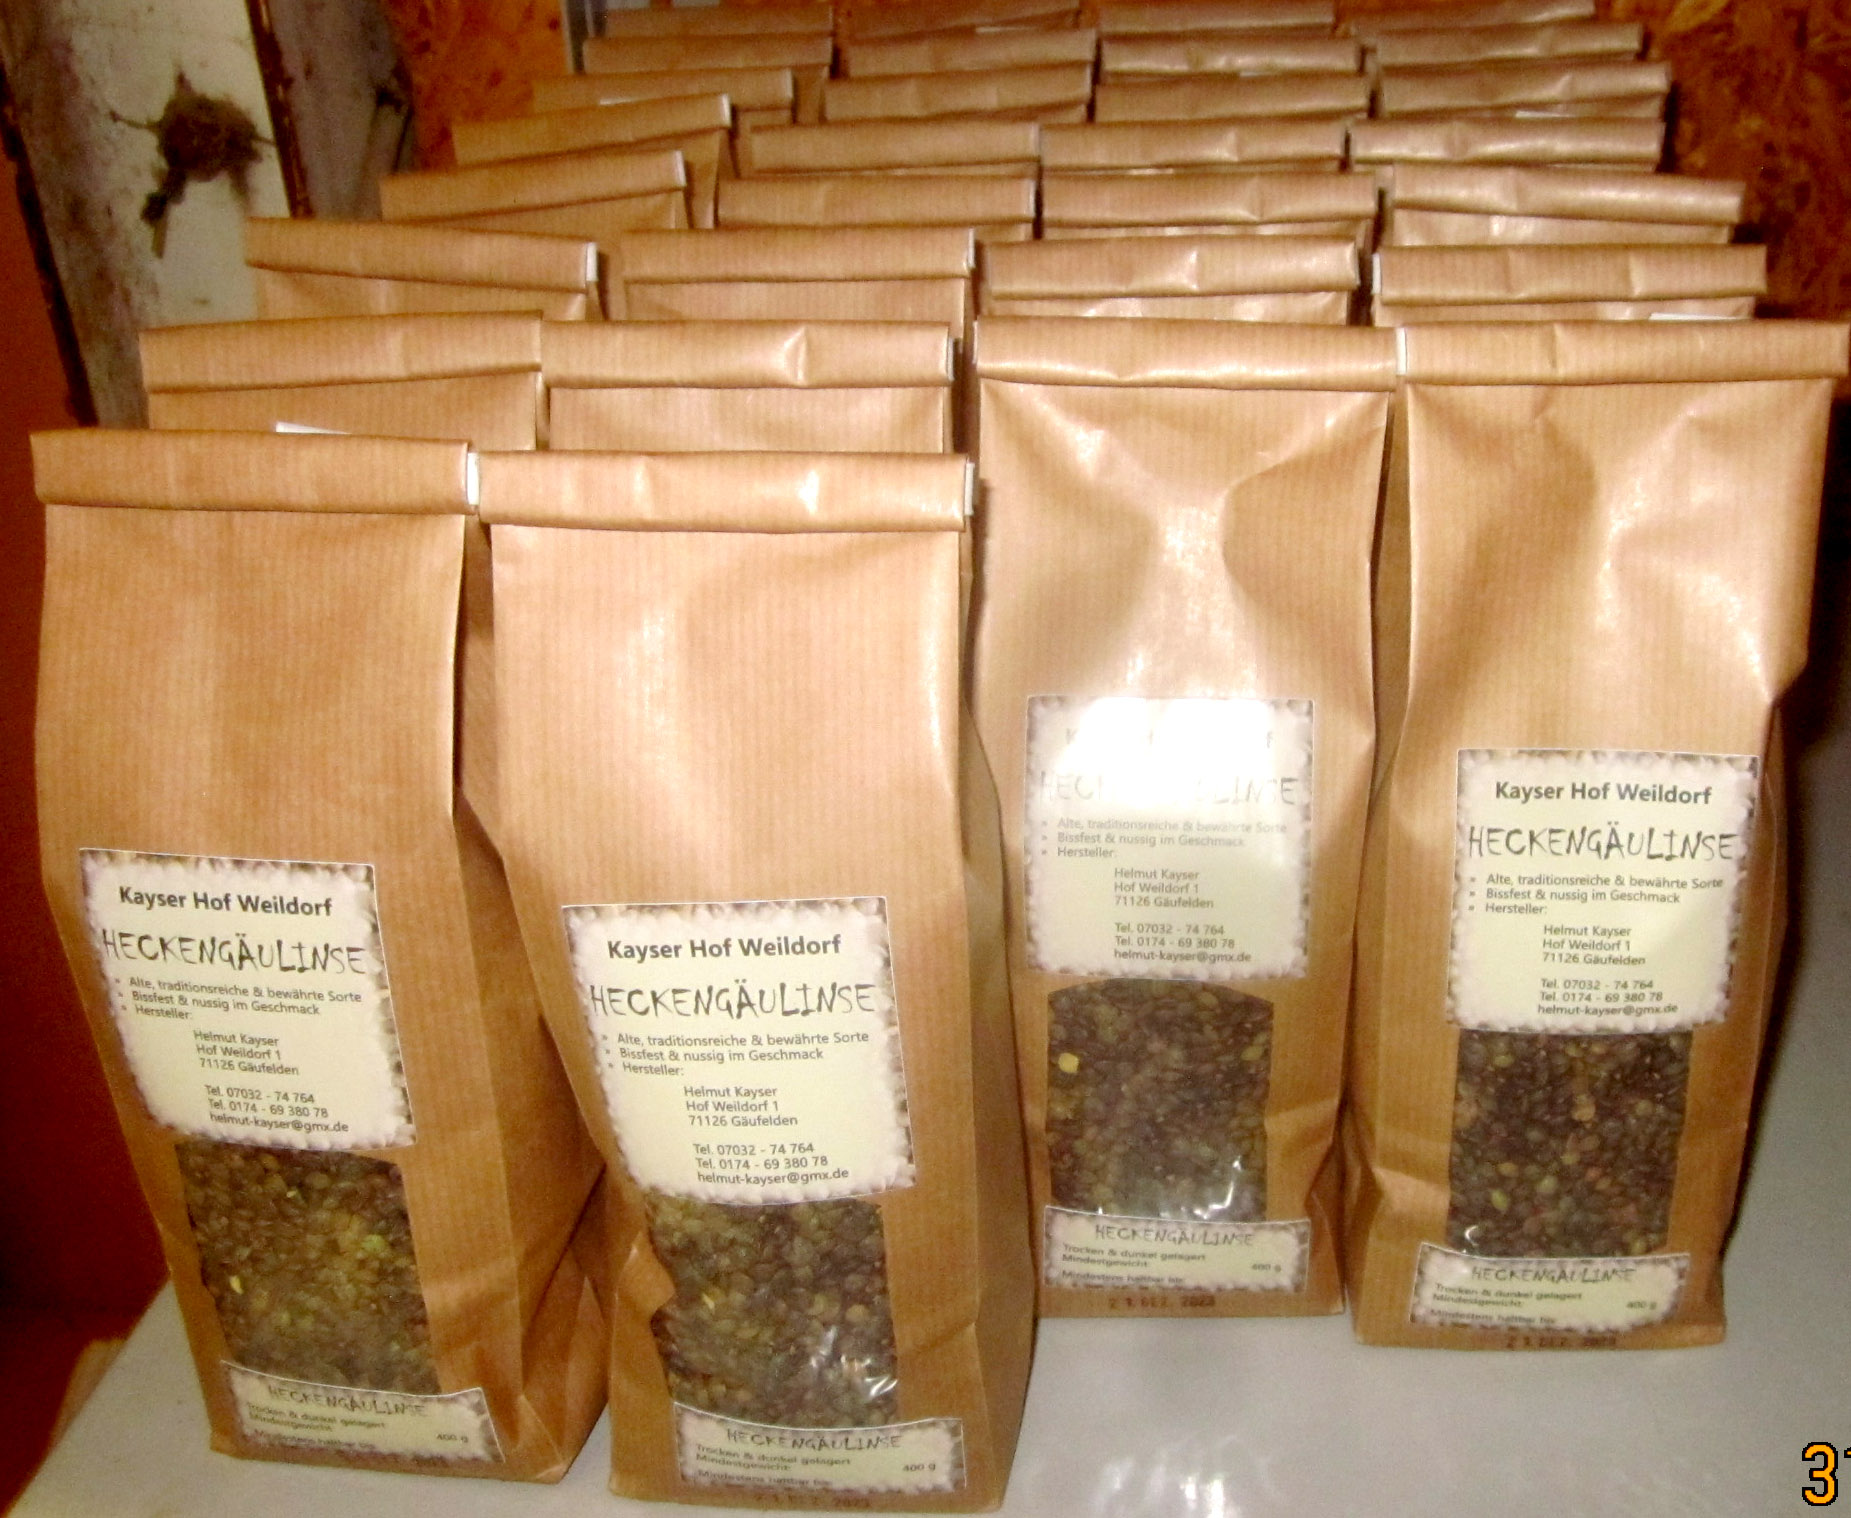 The photo shows 30 ready-filled and labelled lentil packets.